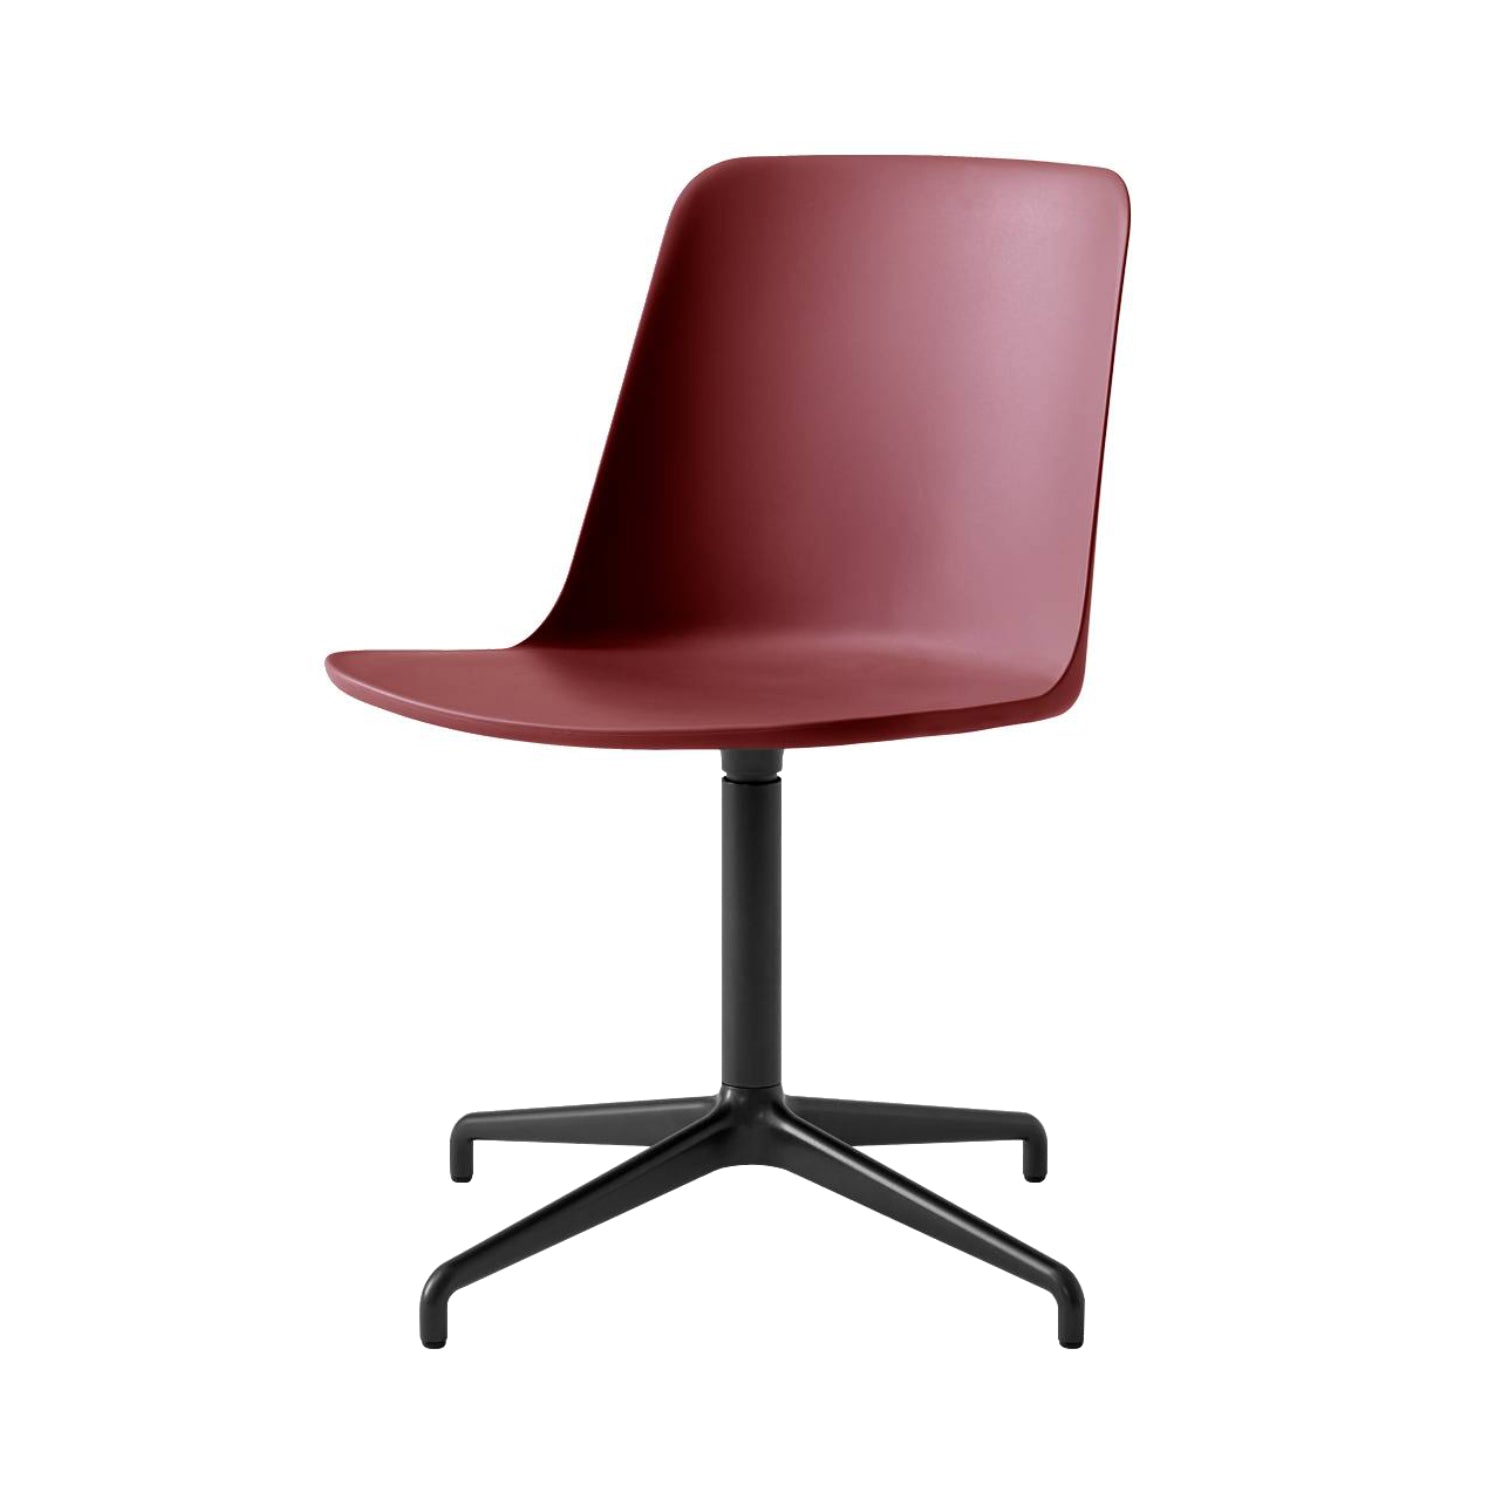 Rely Chair HW16: Red Brown + Black